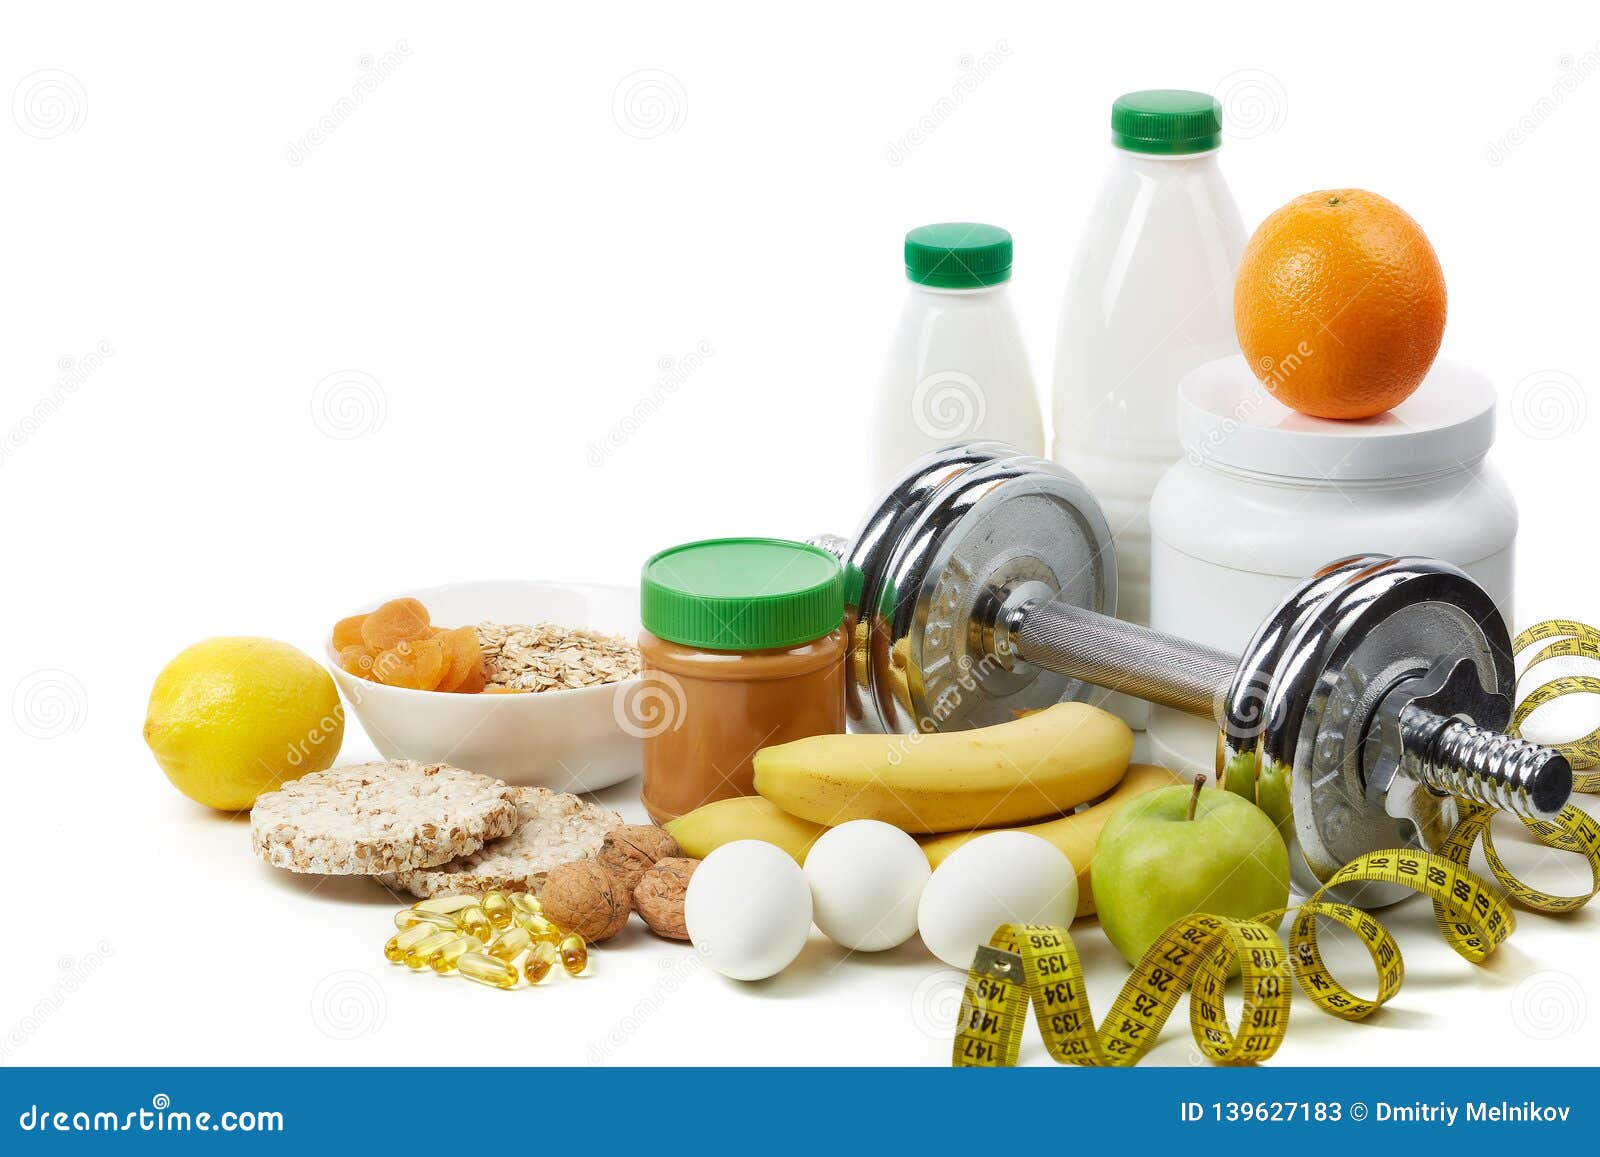 Sports Nutrition and Fitness Equipment Stock Image - Image of lifestyle